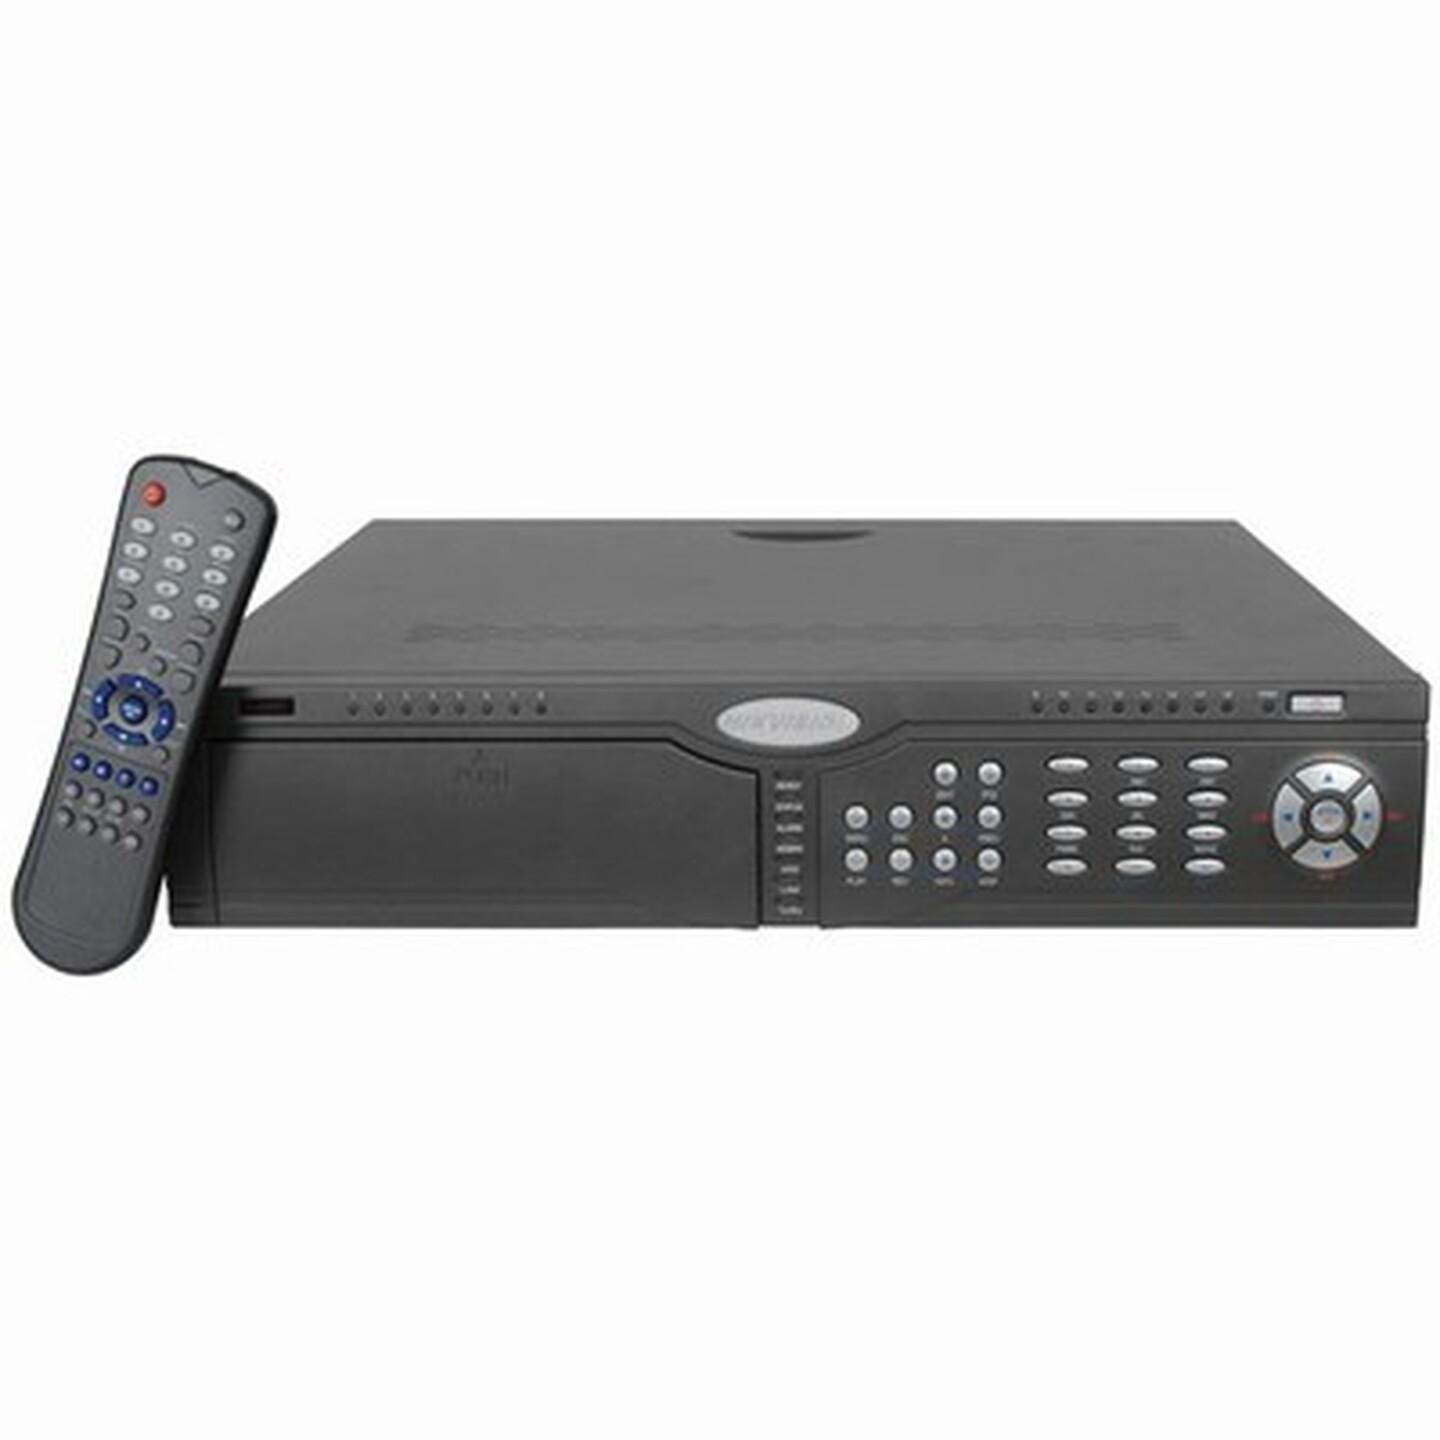 Professional H264 DVR with VGA & DVD Recorder